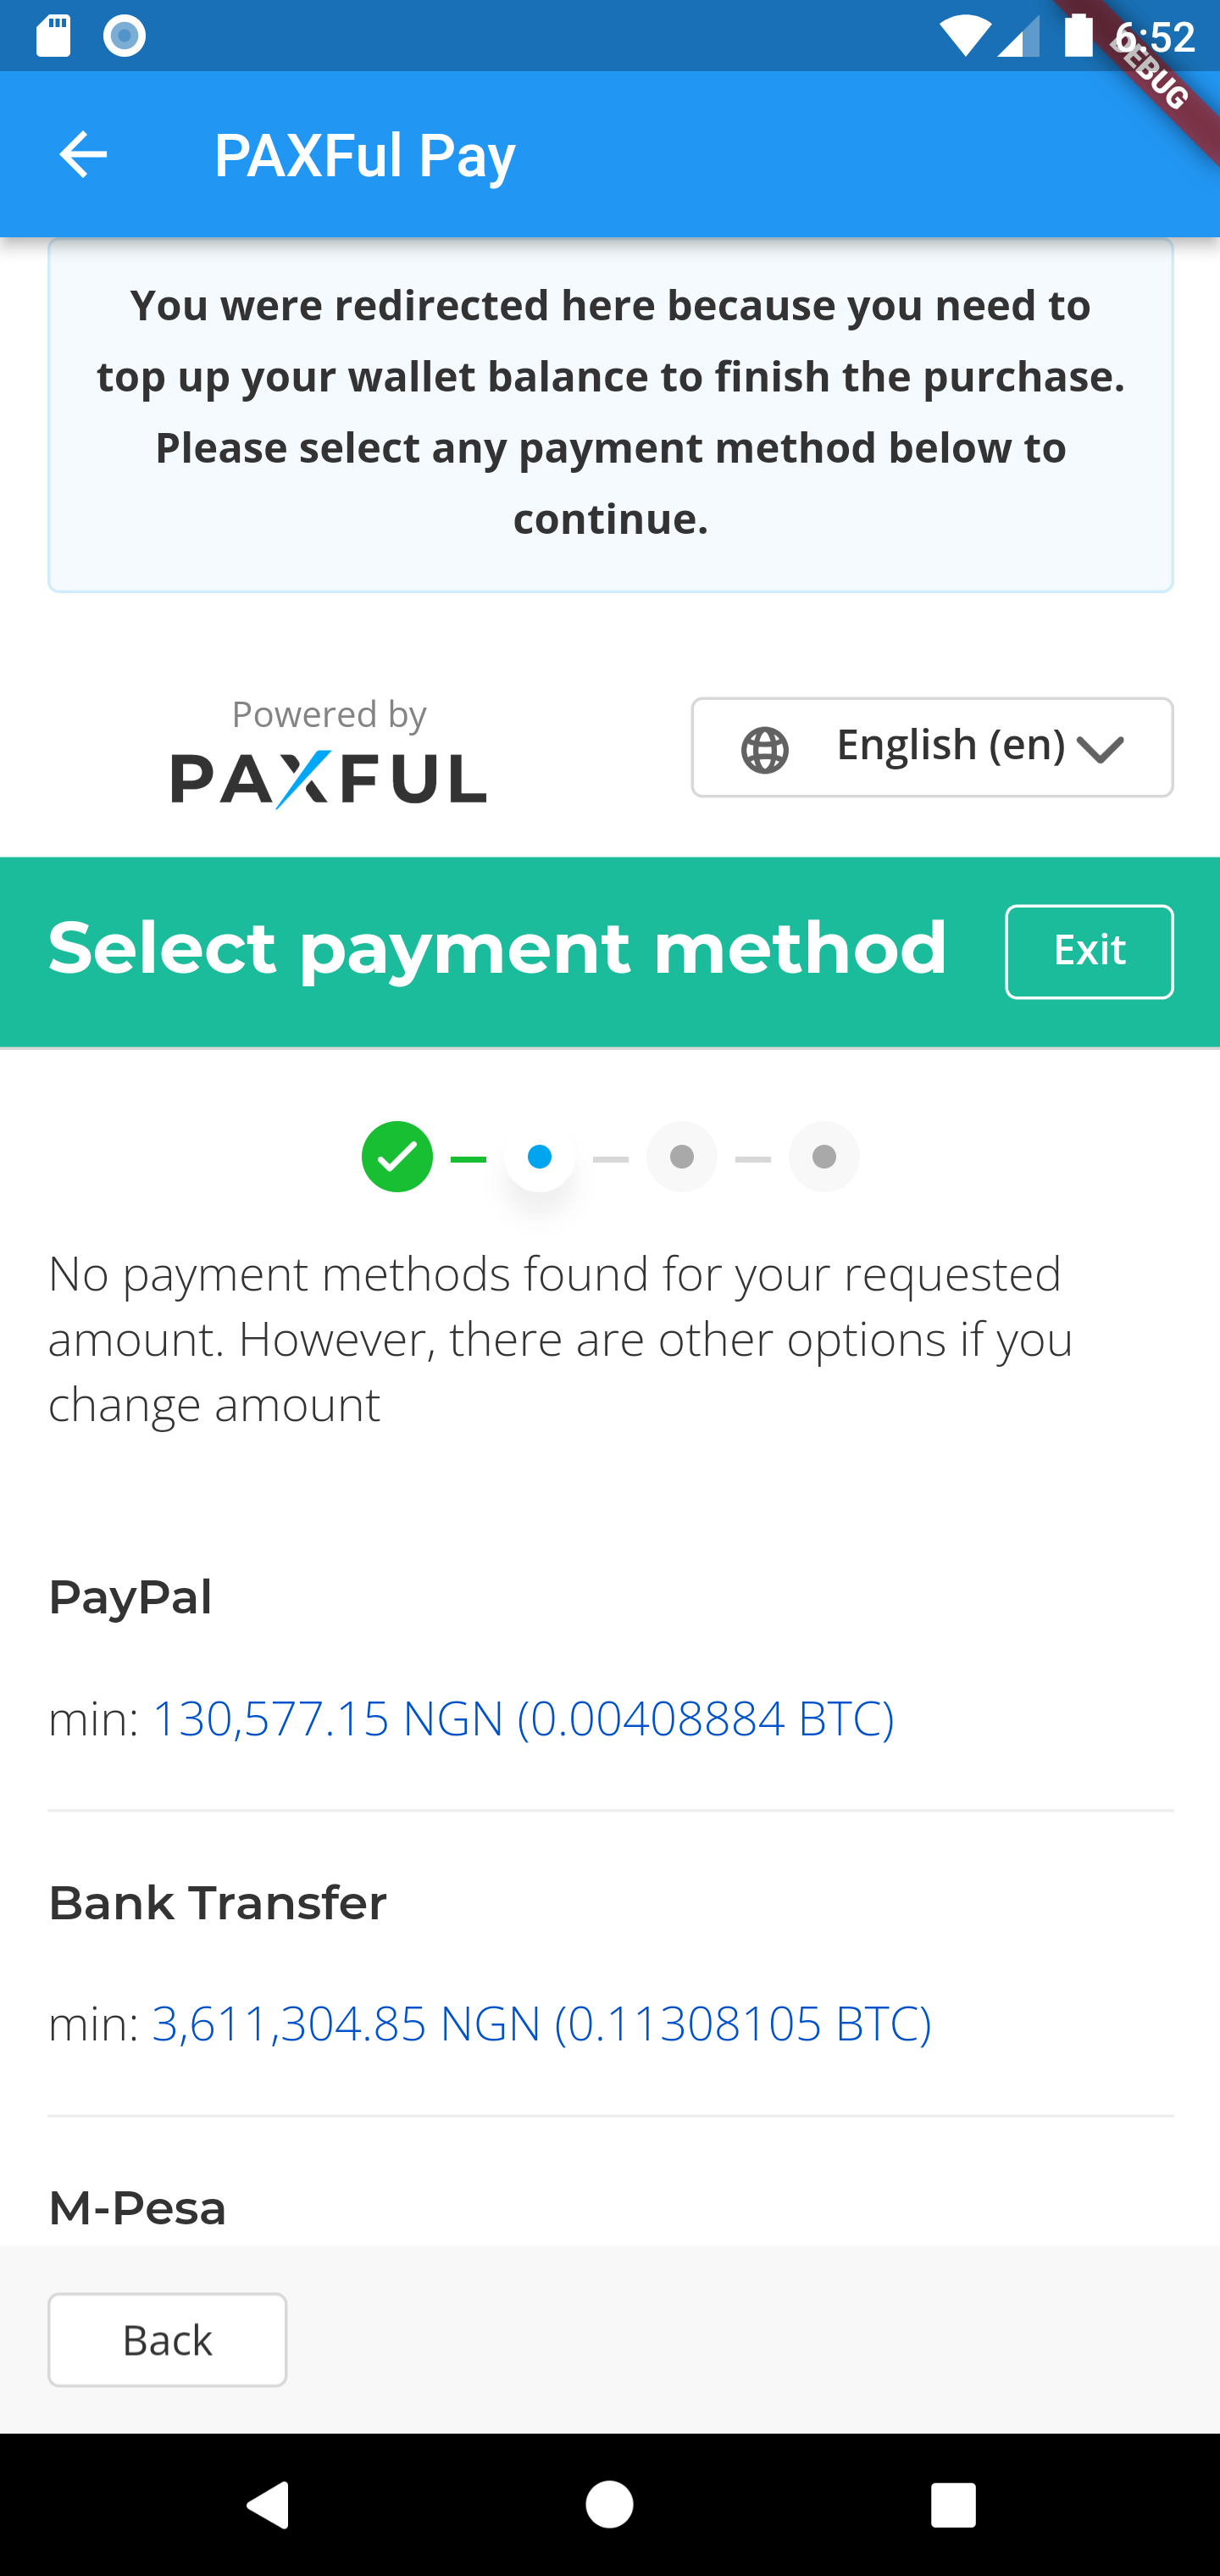 PAXFul Pay